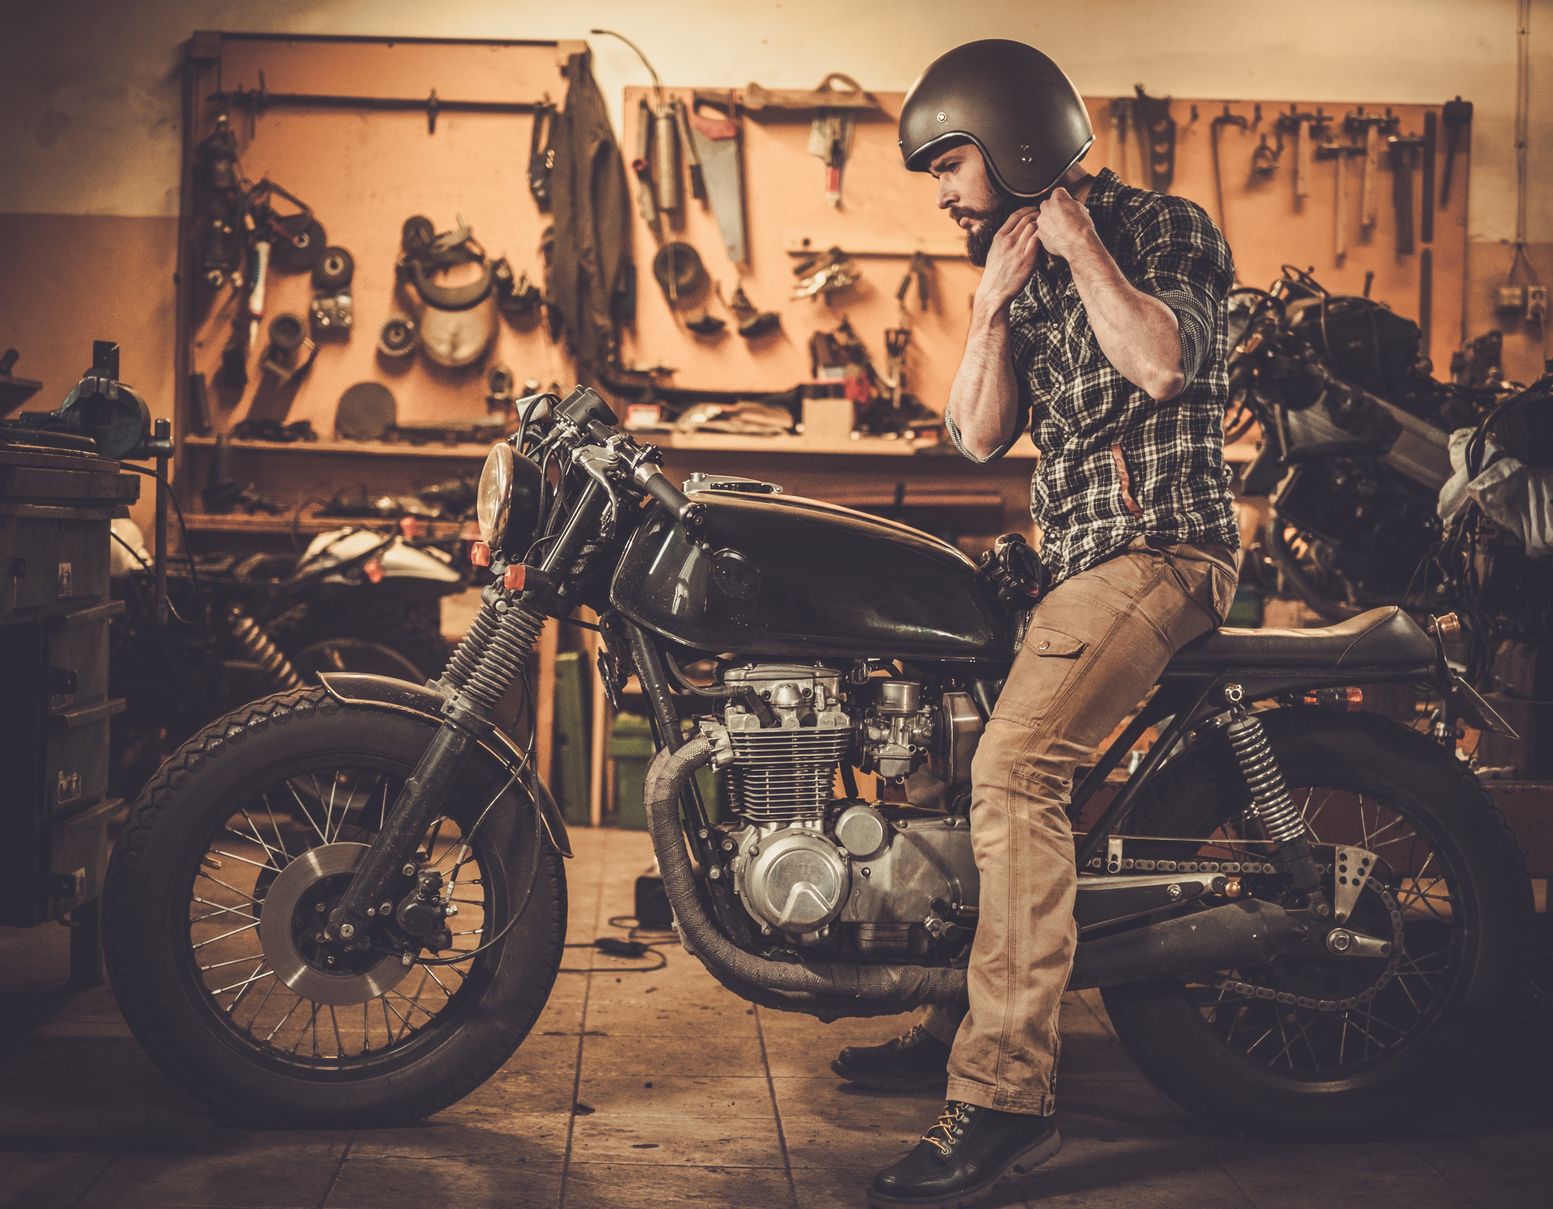 Rider And His Vintage Style Cafe Racer Motorcycle In Customs